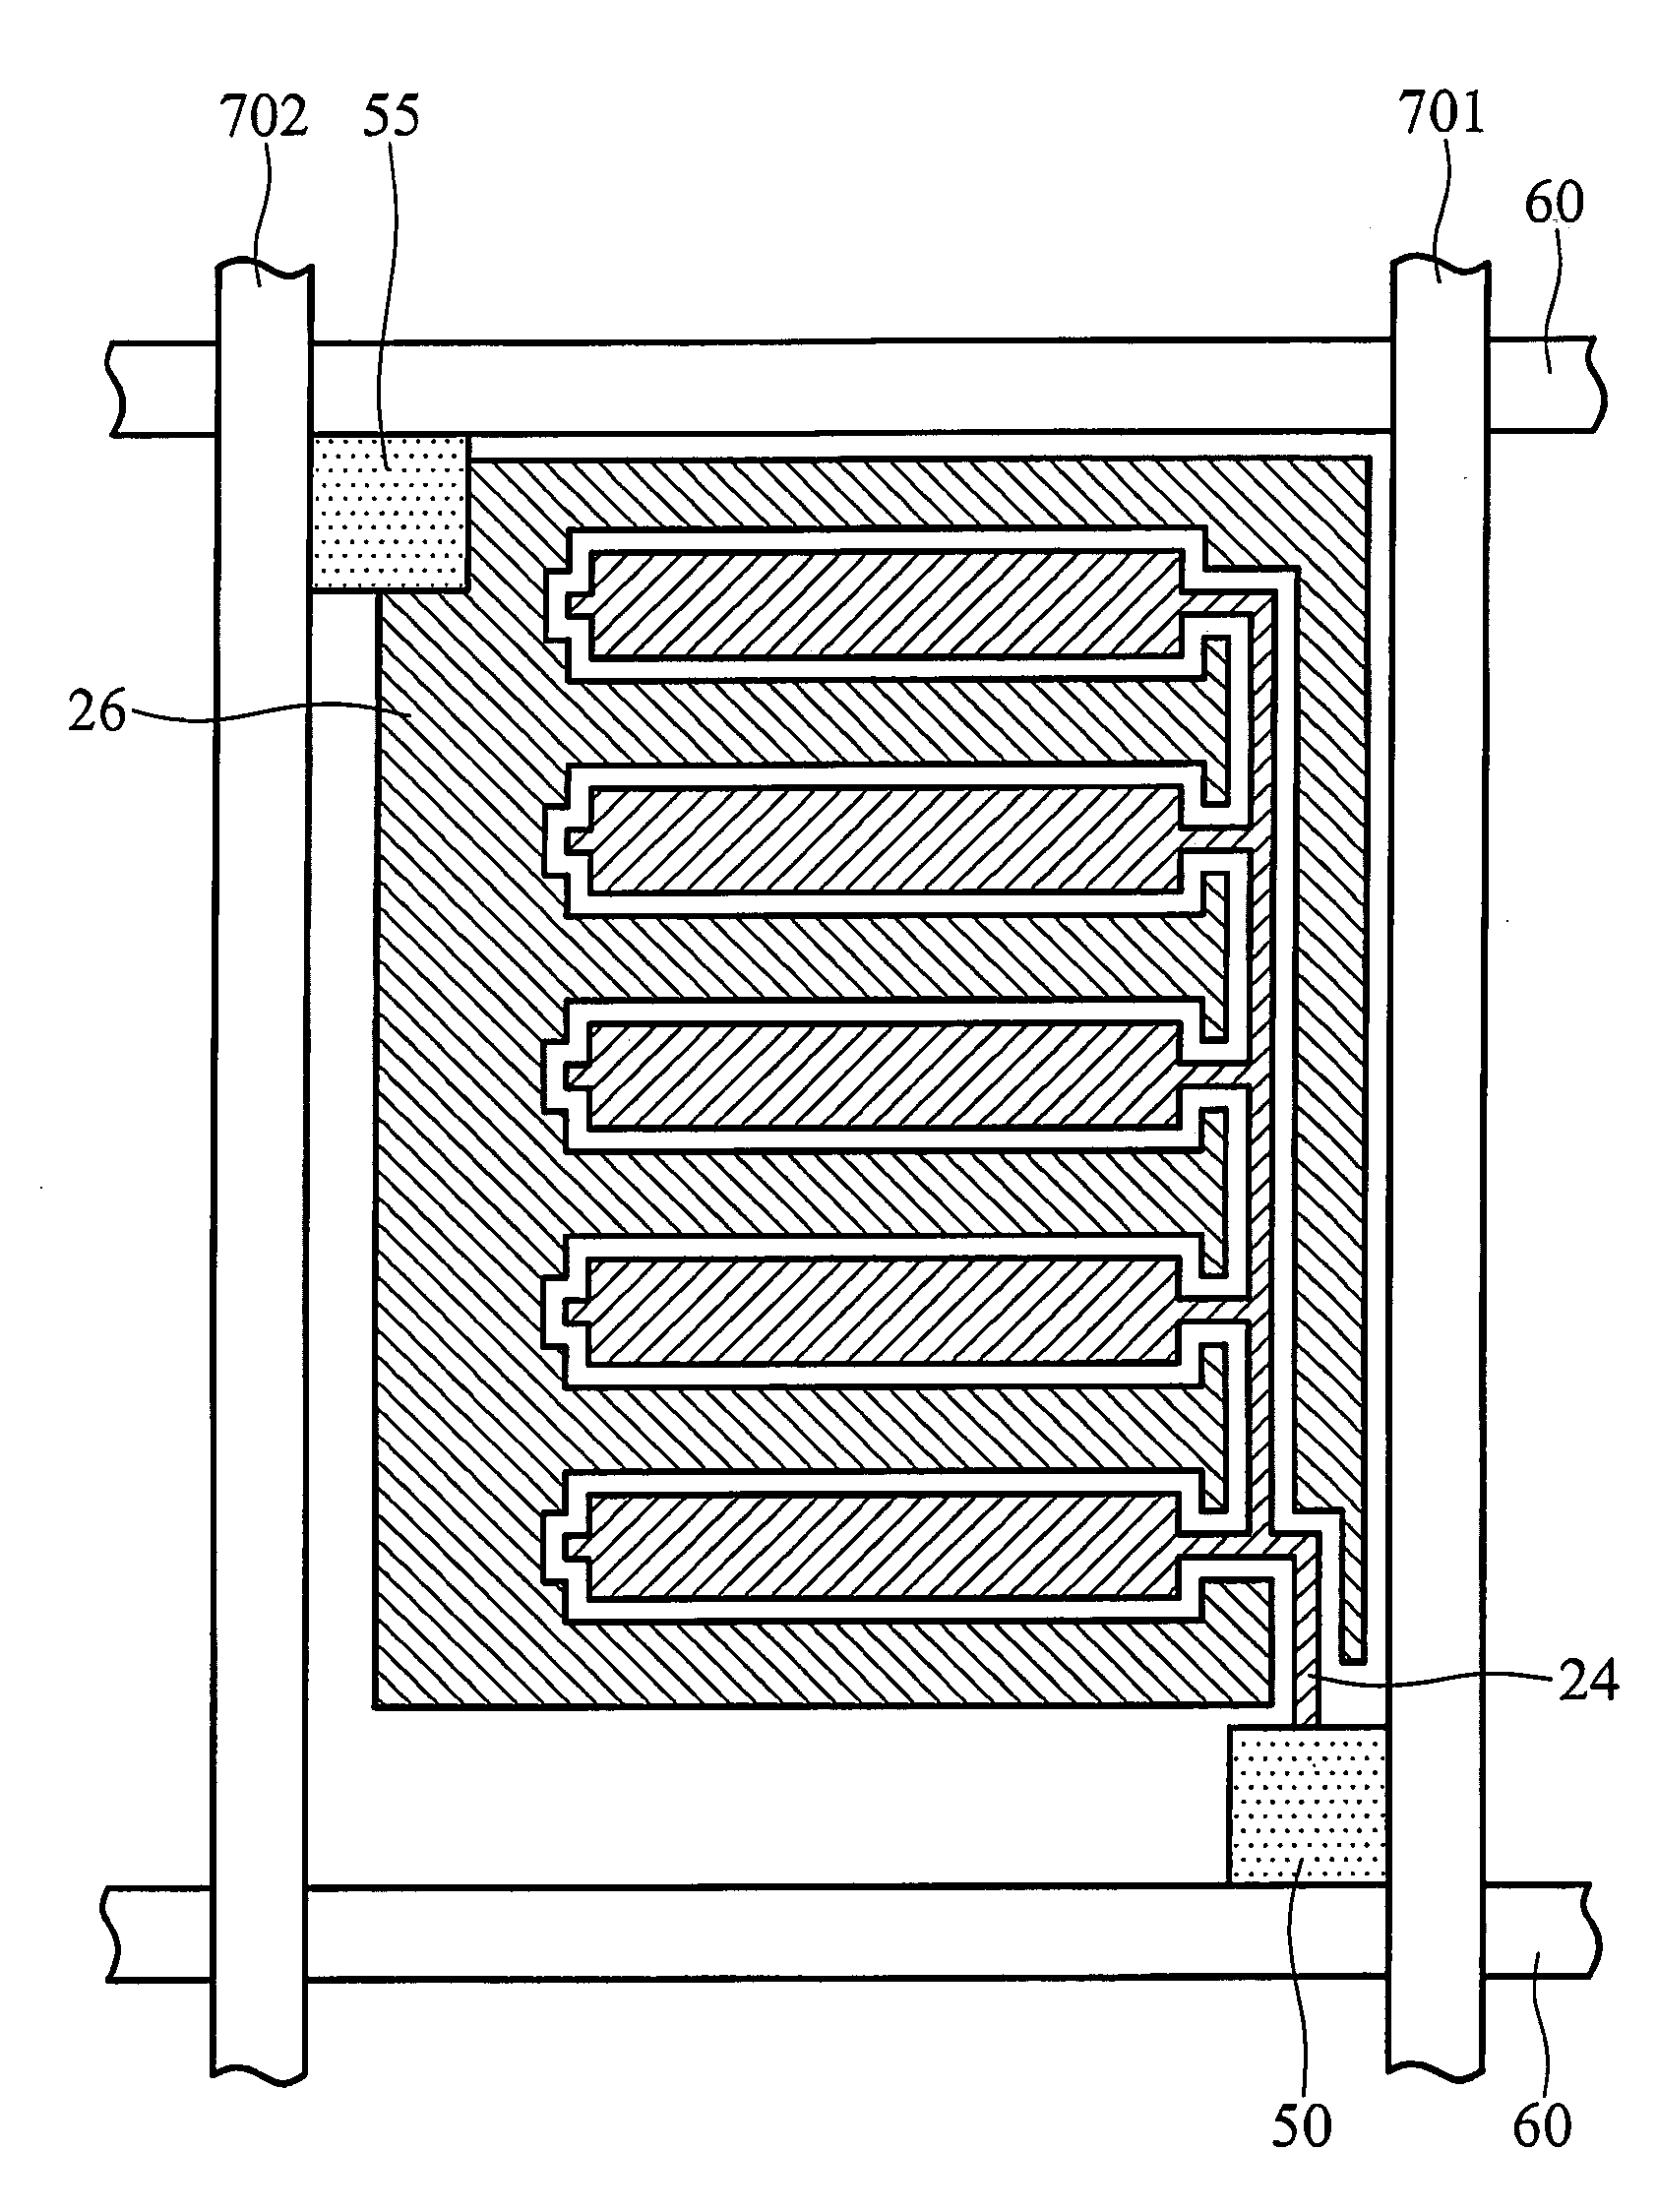 Optically compensated bend mode liquid crystal display devices